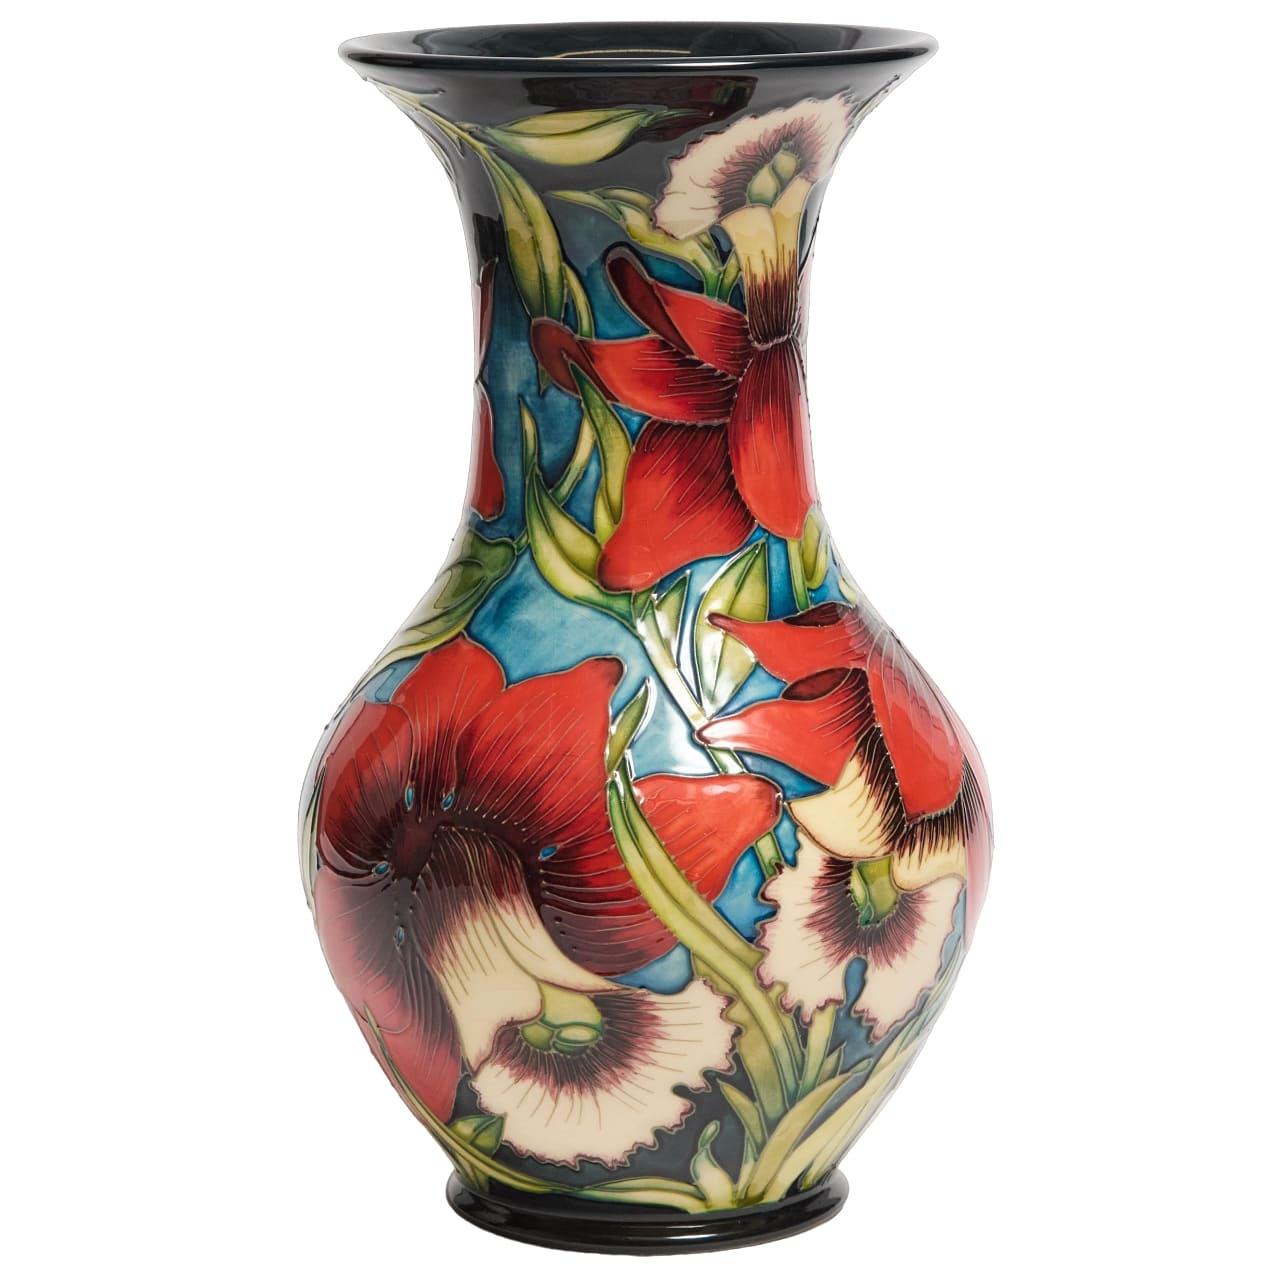 Beautiful vase designed by Shirley Hayes, exquisite design
Limited edition 18/50 dated 2002
height 13 in
impressed and painted marks on the underside

Minor glaze cracks are not significant; otherwise in good condition